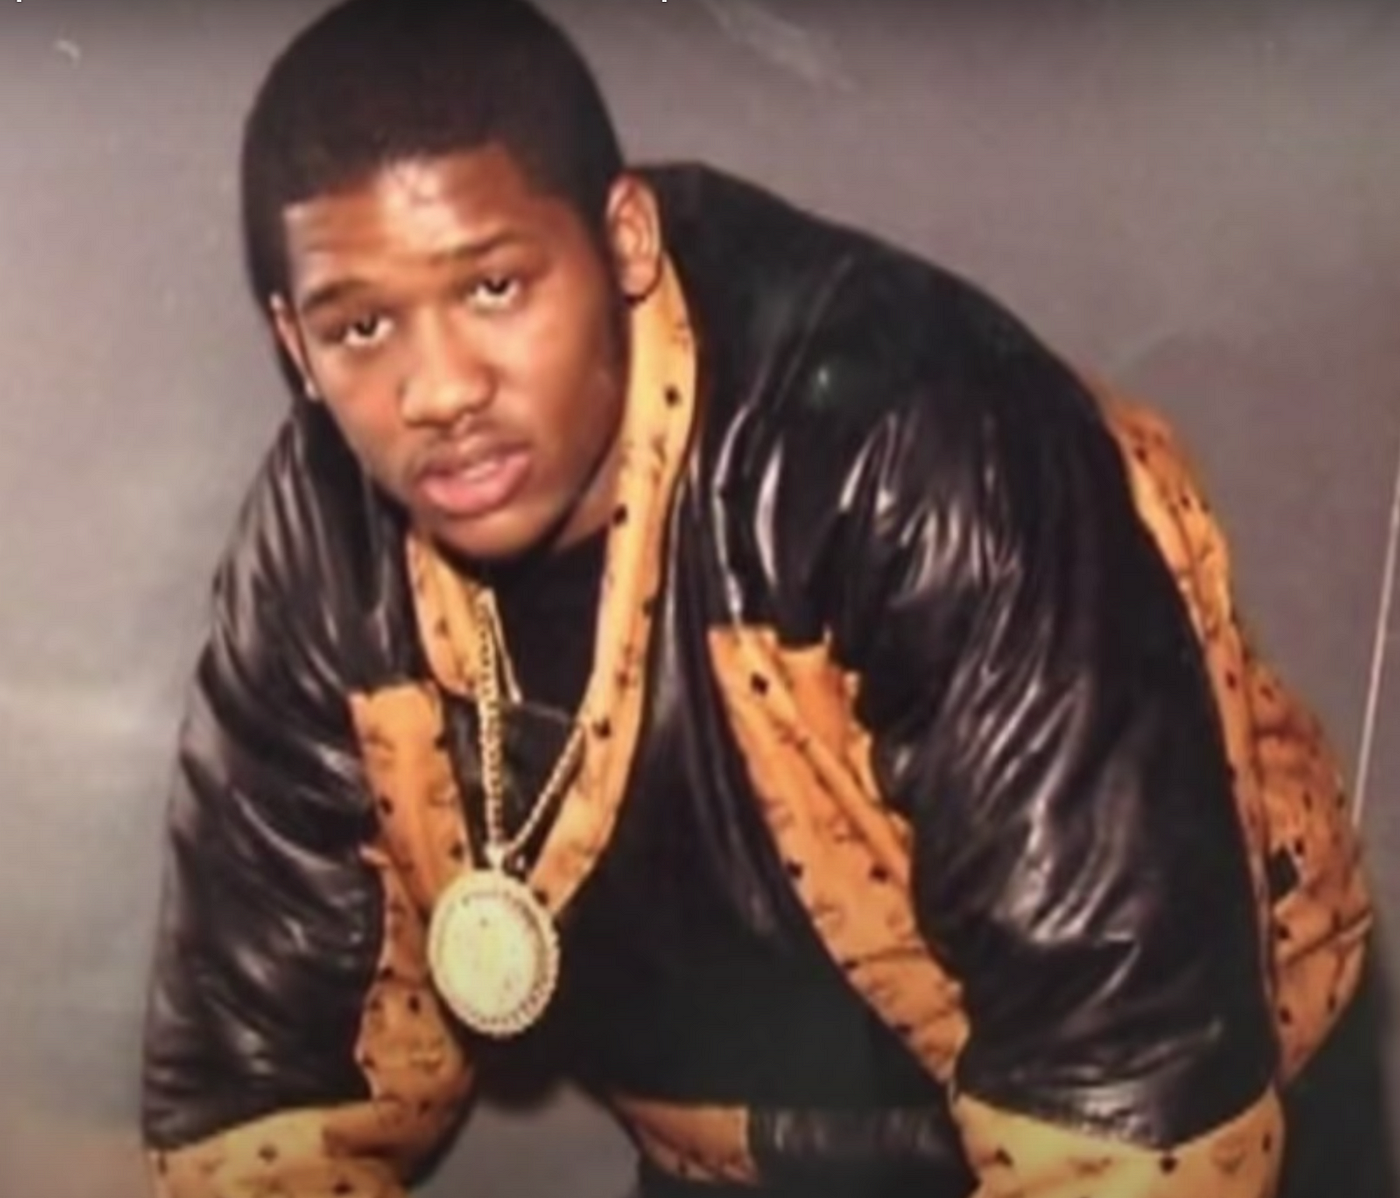 Azie Faison on the Life & Death of Alpo, Rich Porter & the Real